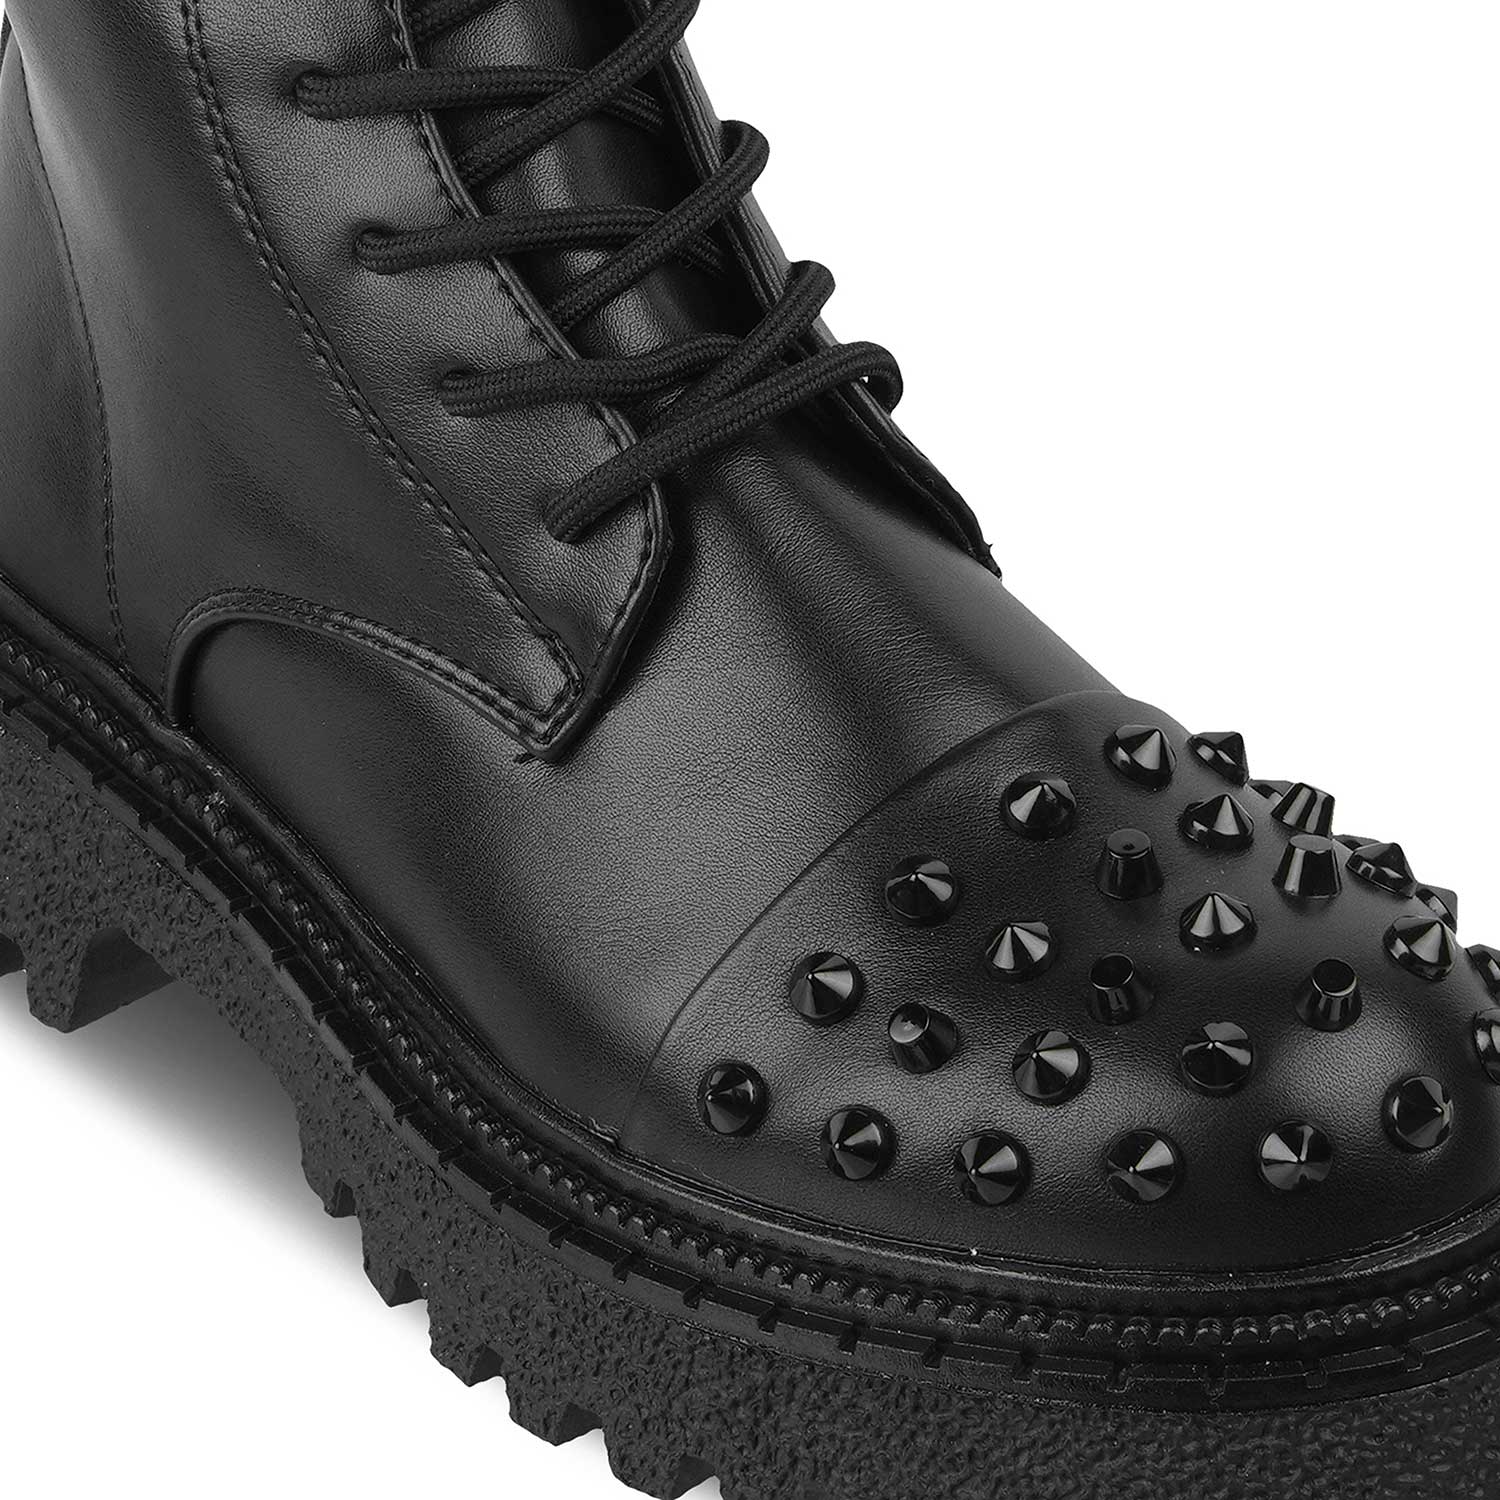 The Forcay Black Women's Boots Tresmode